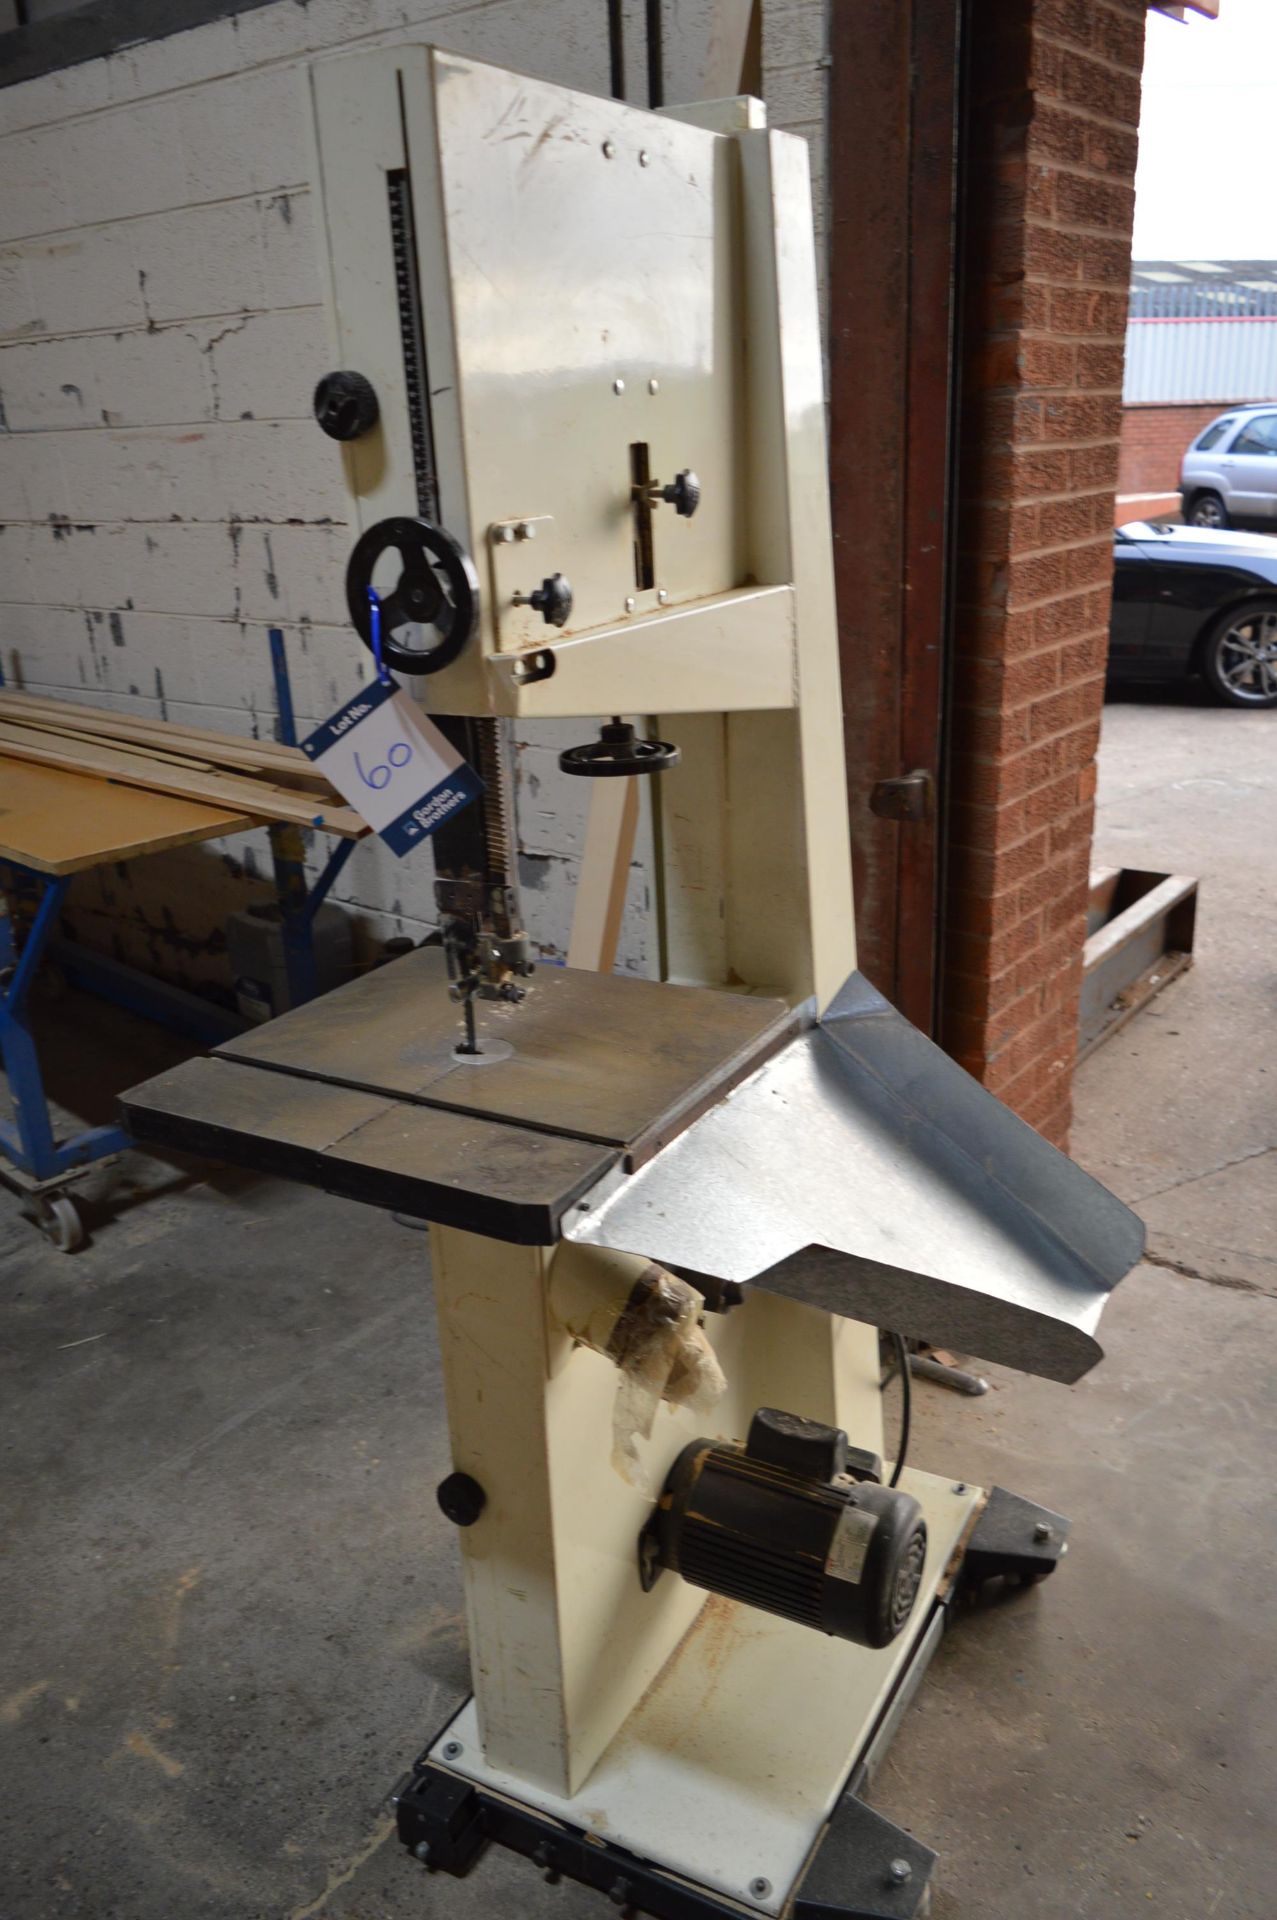 JET JWBS-18 vertical bandsaw, Serial No. 05111027 (2005) (Location: Two Gates) - Image 2 of 3